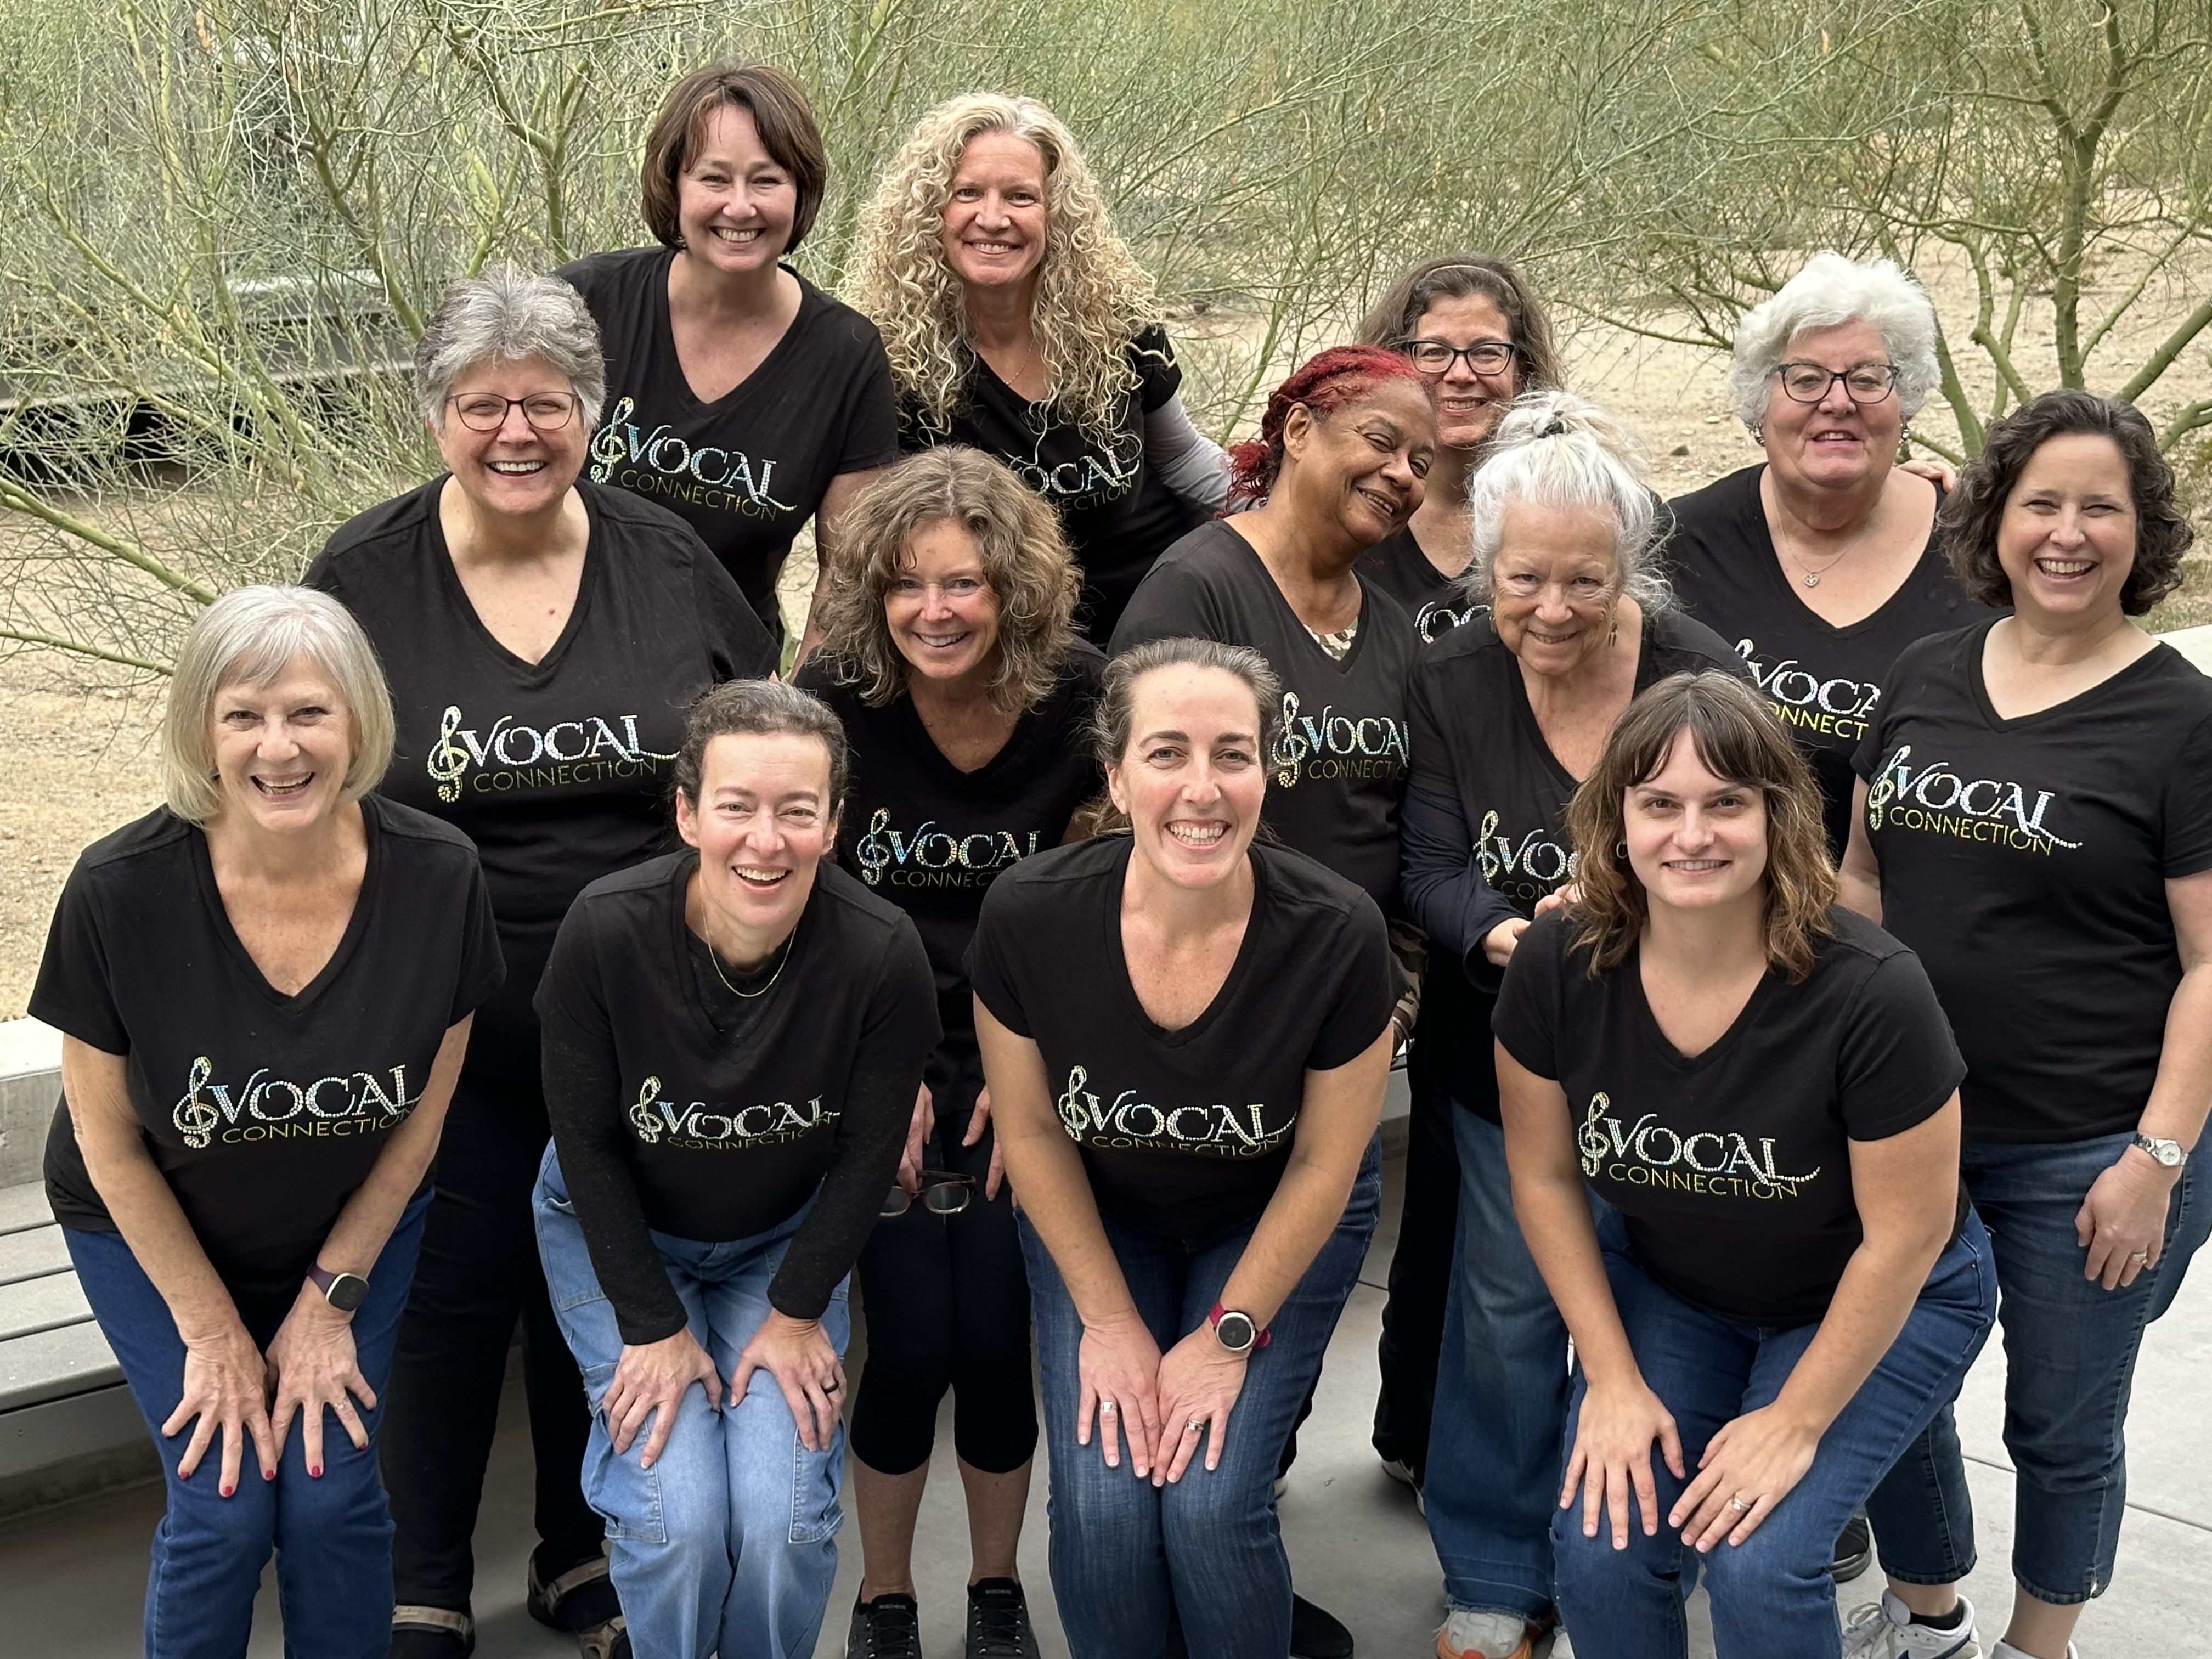 Vocal Connection at our retreat near South Mountain.